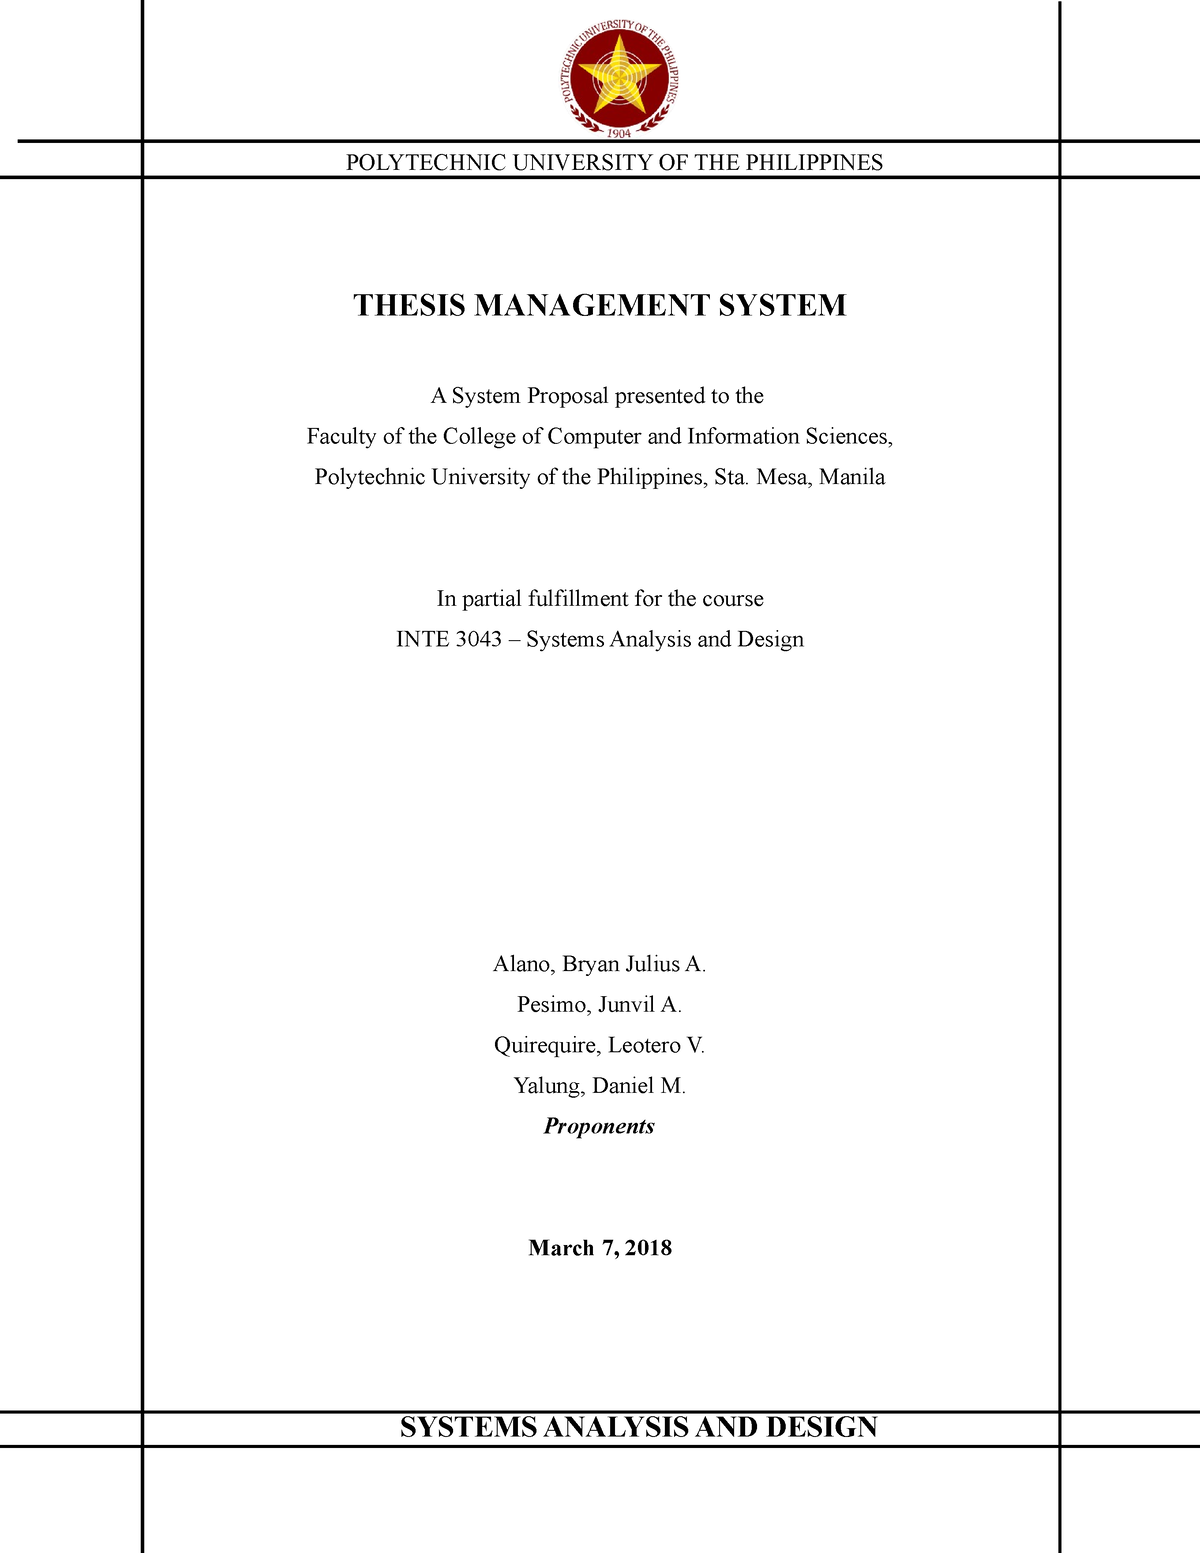 thesis project management system